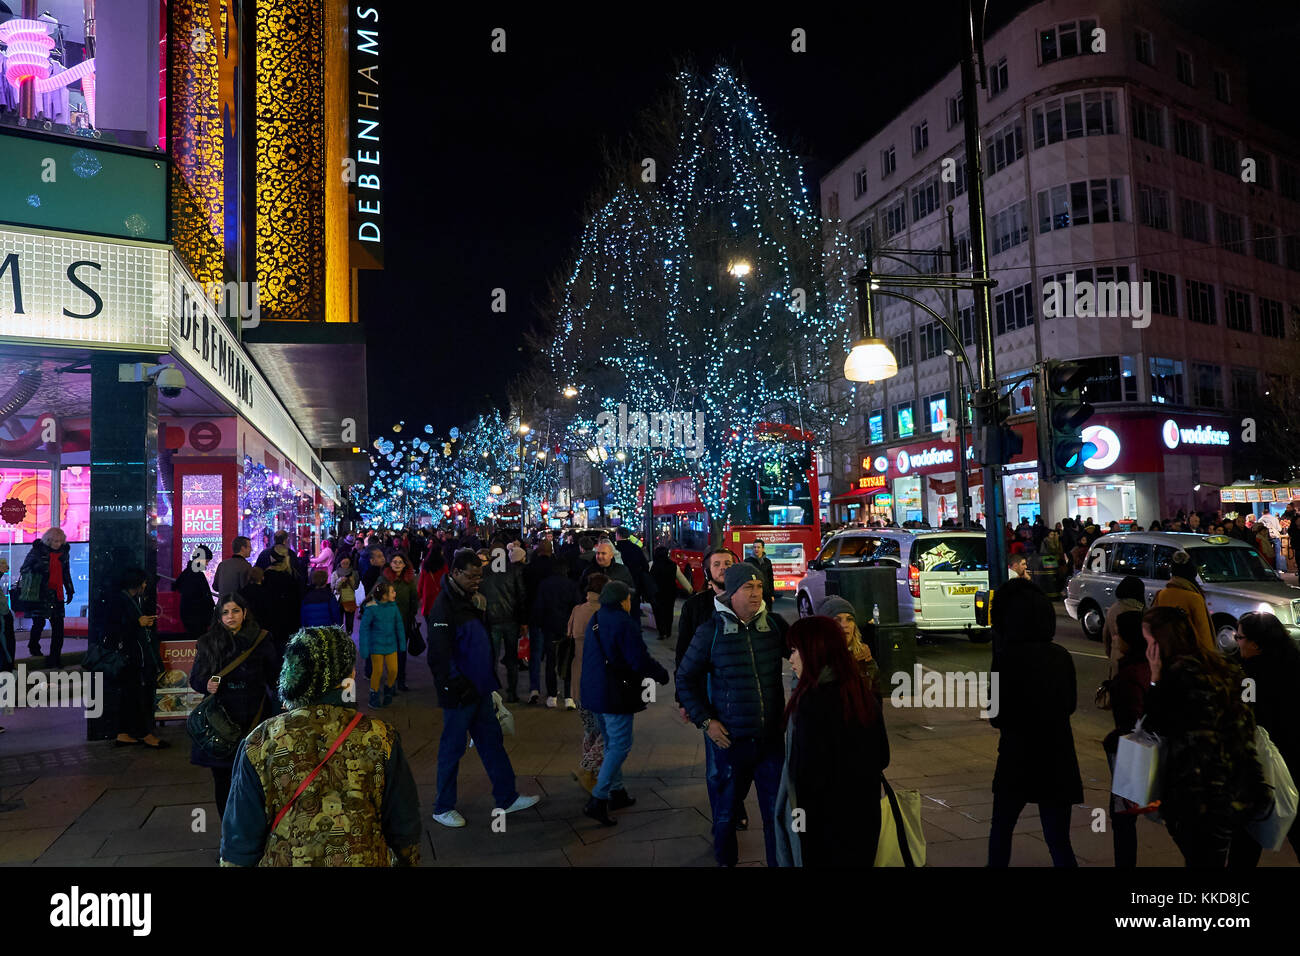 LONDON CITY - DECEMBER 24, 2016: People walking up and down Oxford Street with lots of Christmas decorations Stock Photo